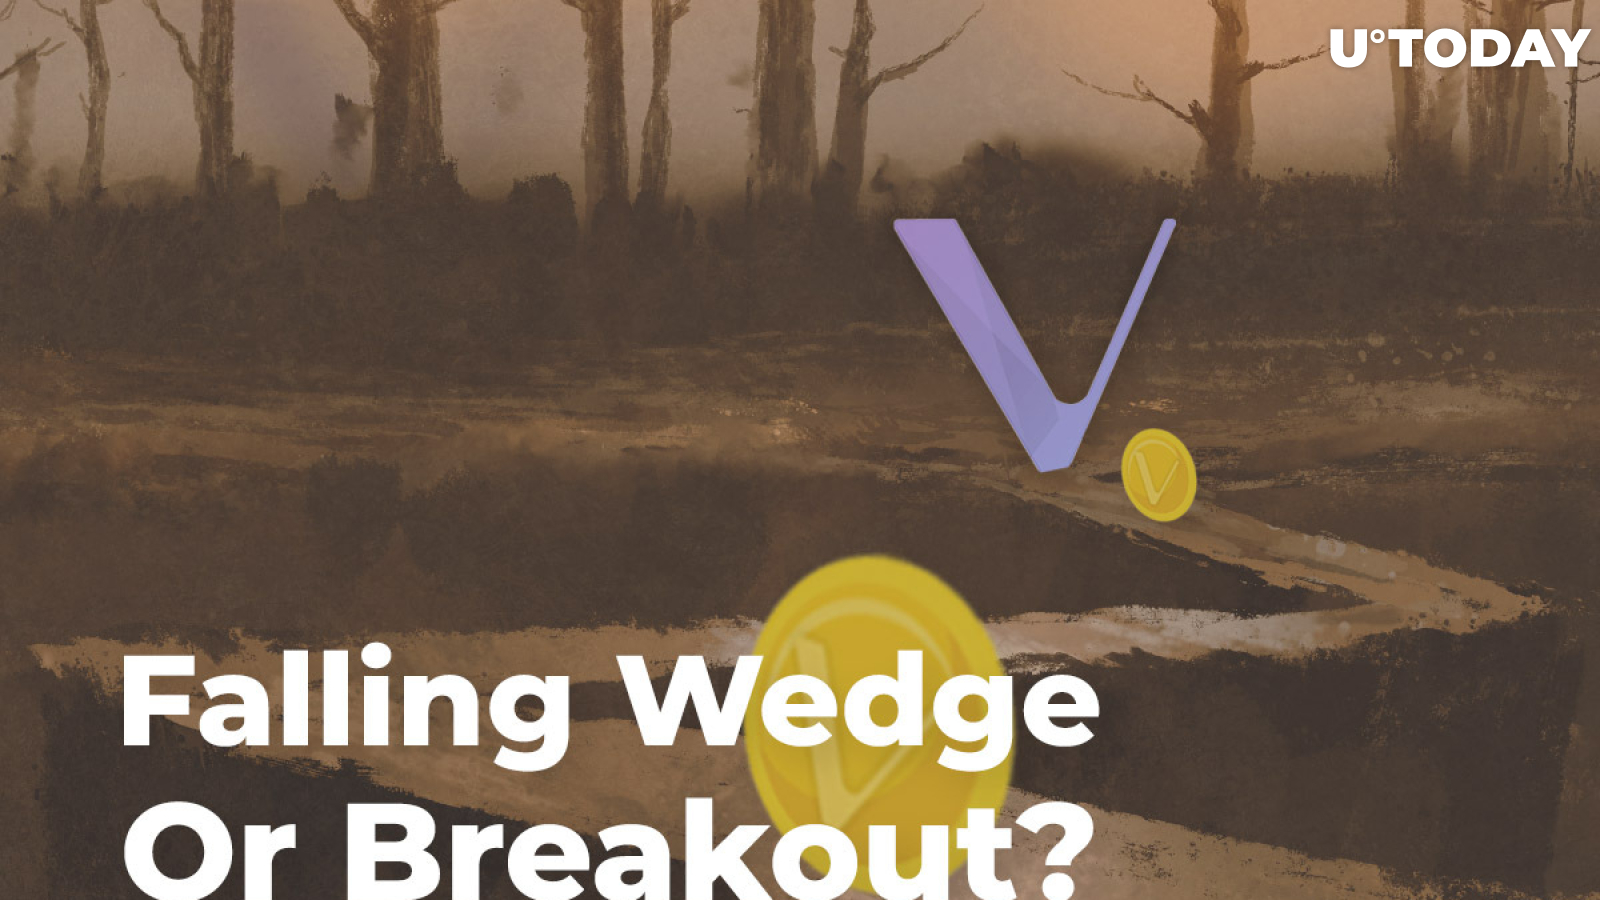 Vechain (VET) Price On The Crossroads: Falling Wedge Or Breakout?